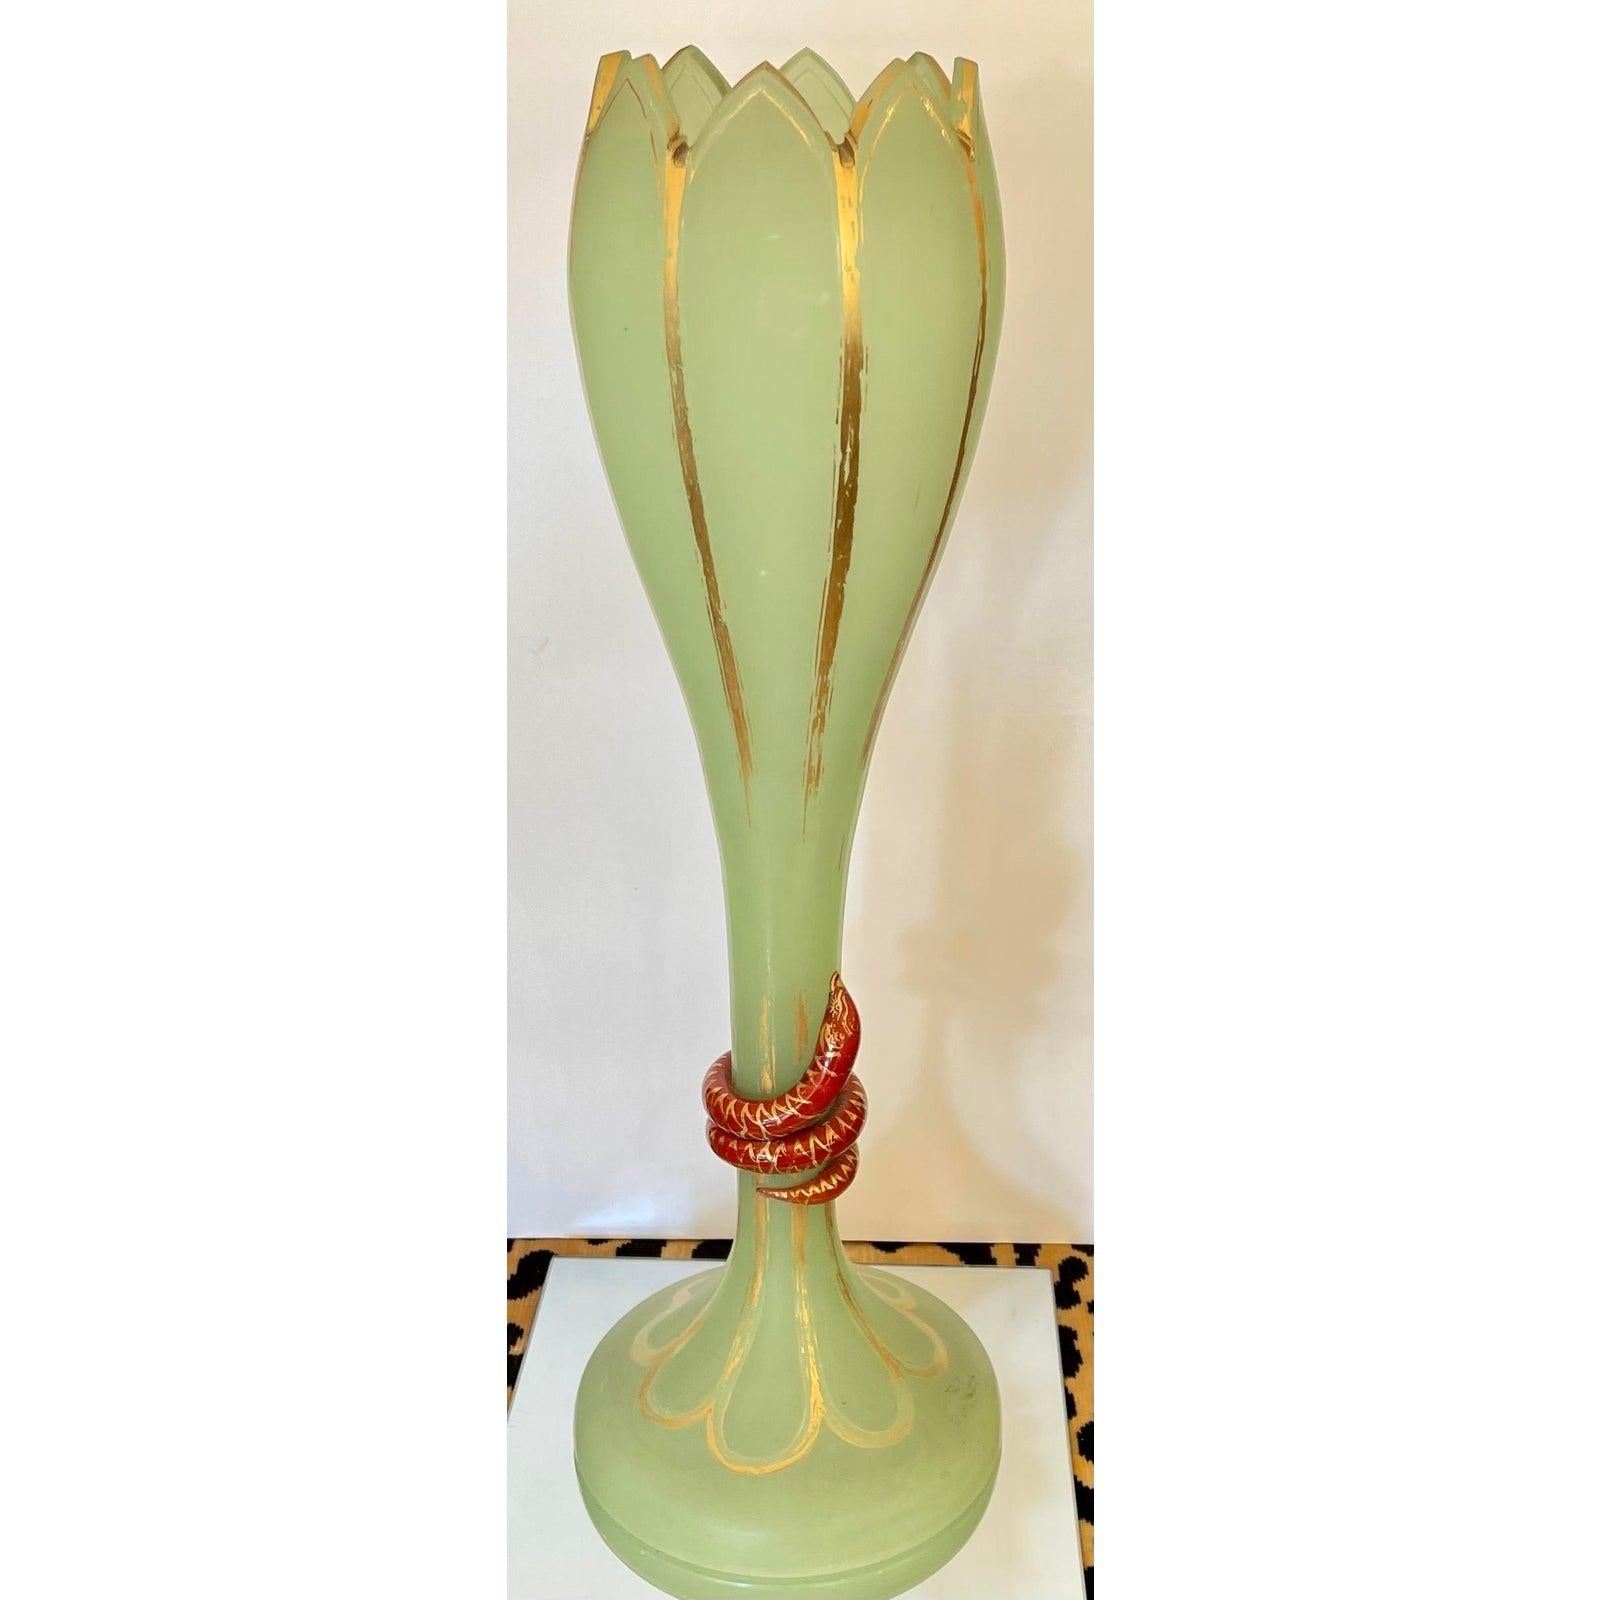 Huge antique 19th c Baccarat green opaline glass vase. It is a rare and unusual example with a scalloped rim and red serpent applique.

Additional information:
Materials: crystal
Color: green
Brand: Baccarat
Designer: Baccarat
Period: 19th